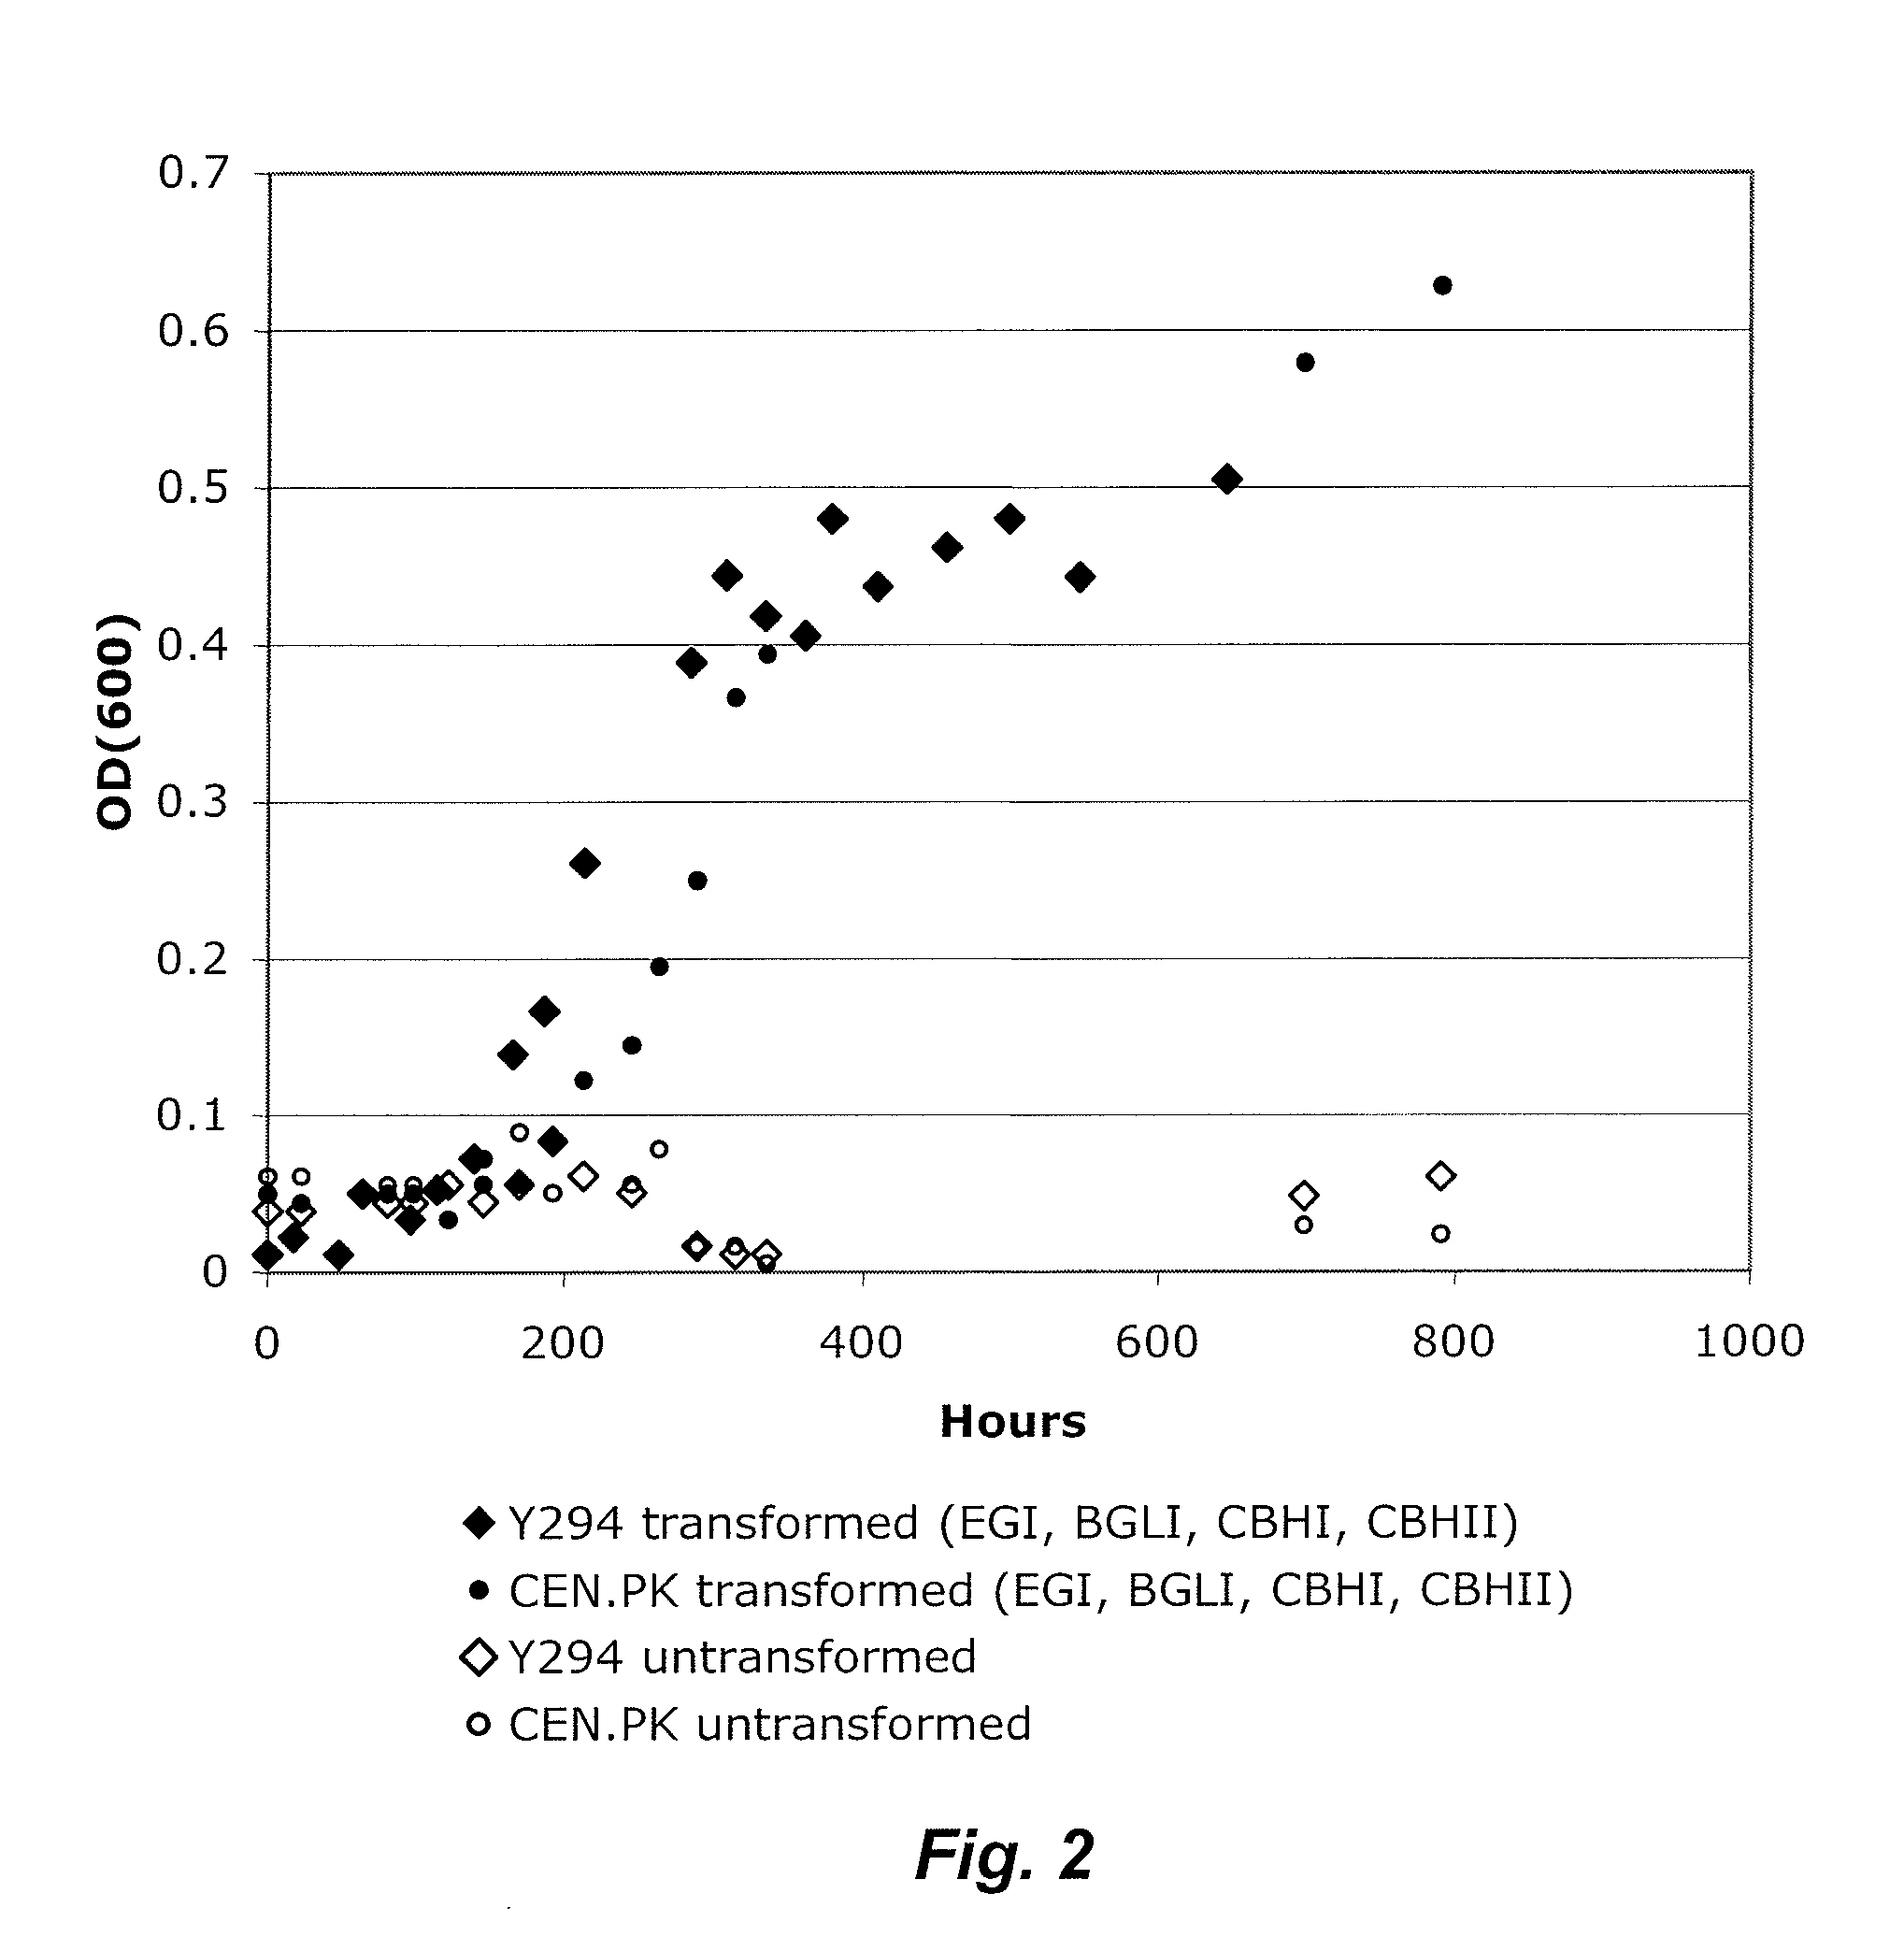 Recombinant Yeast Strains Expressing Tethered Cellulase Enzymes